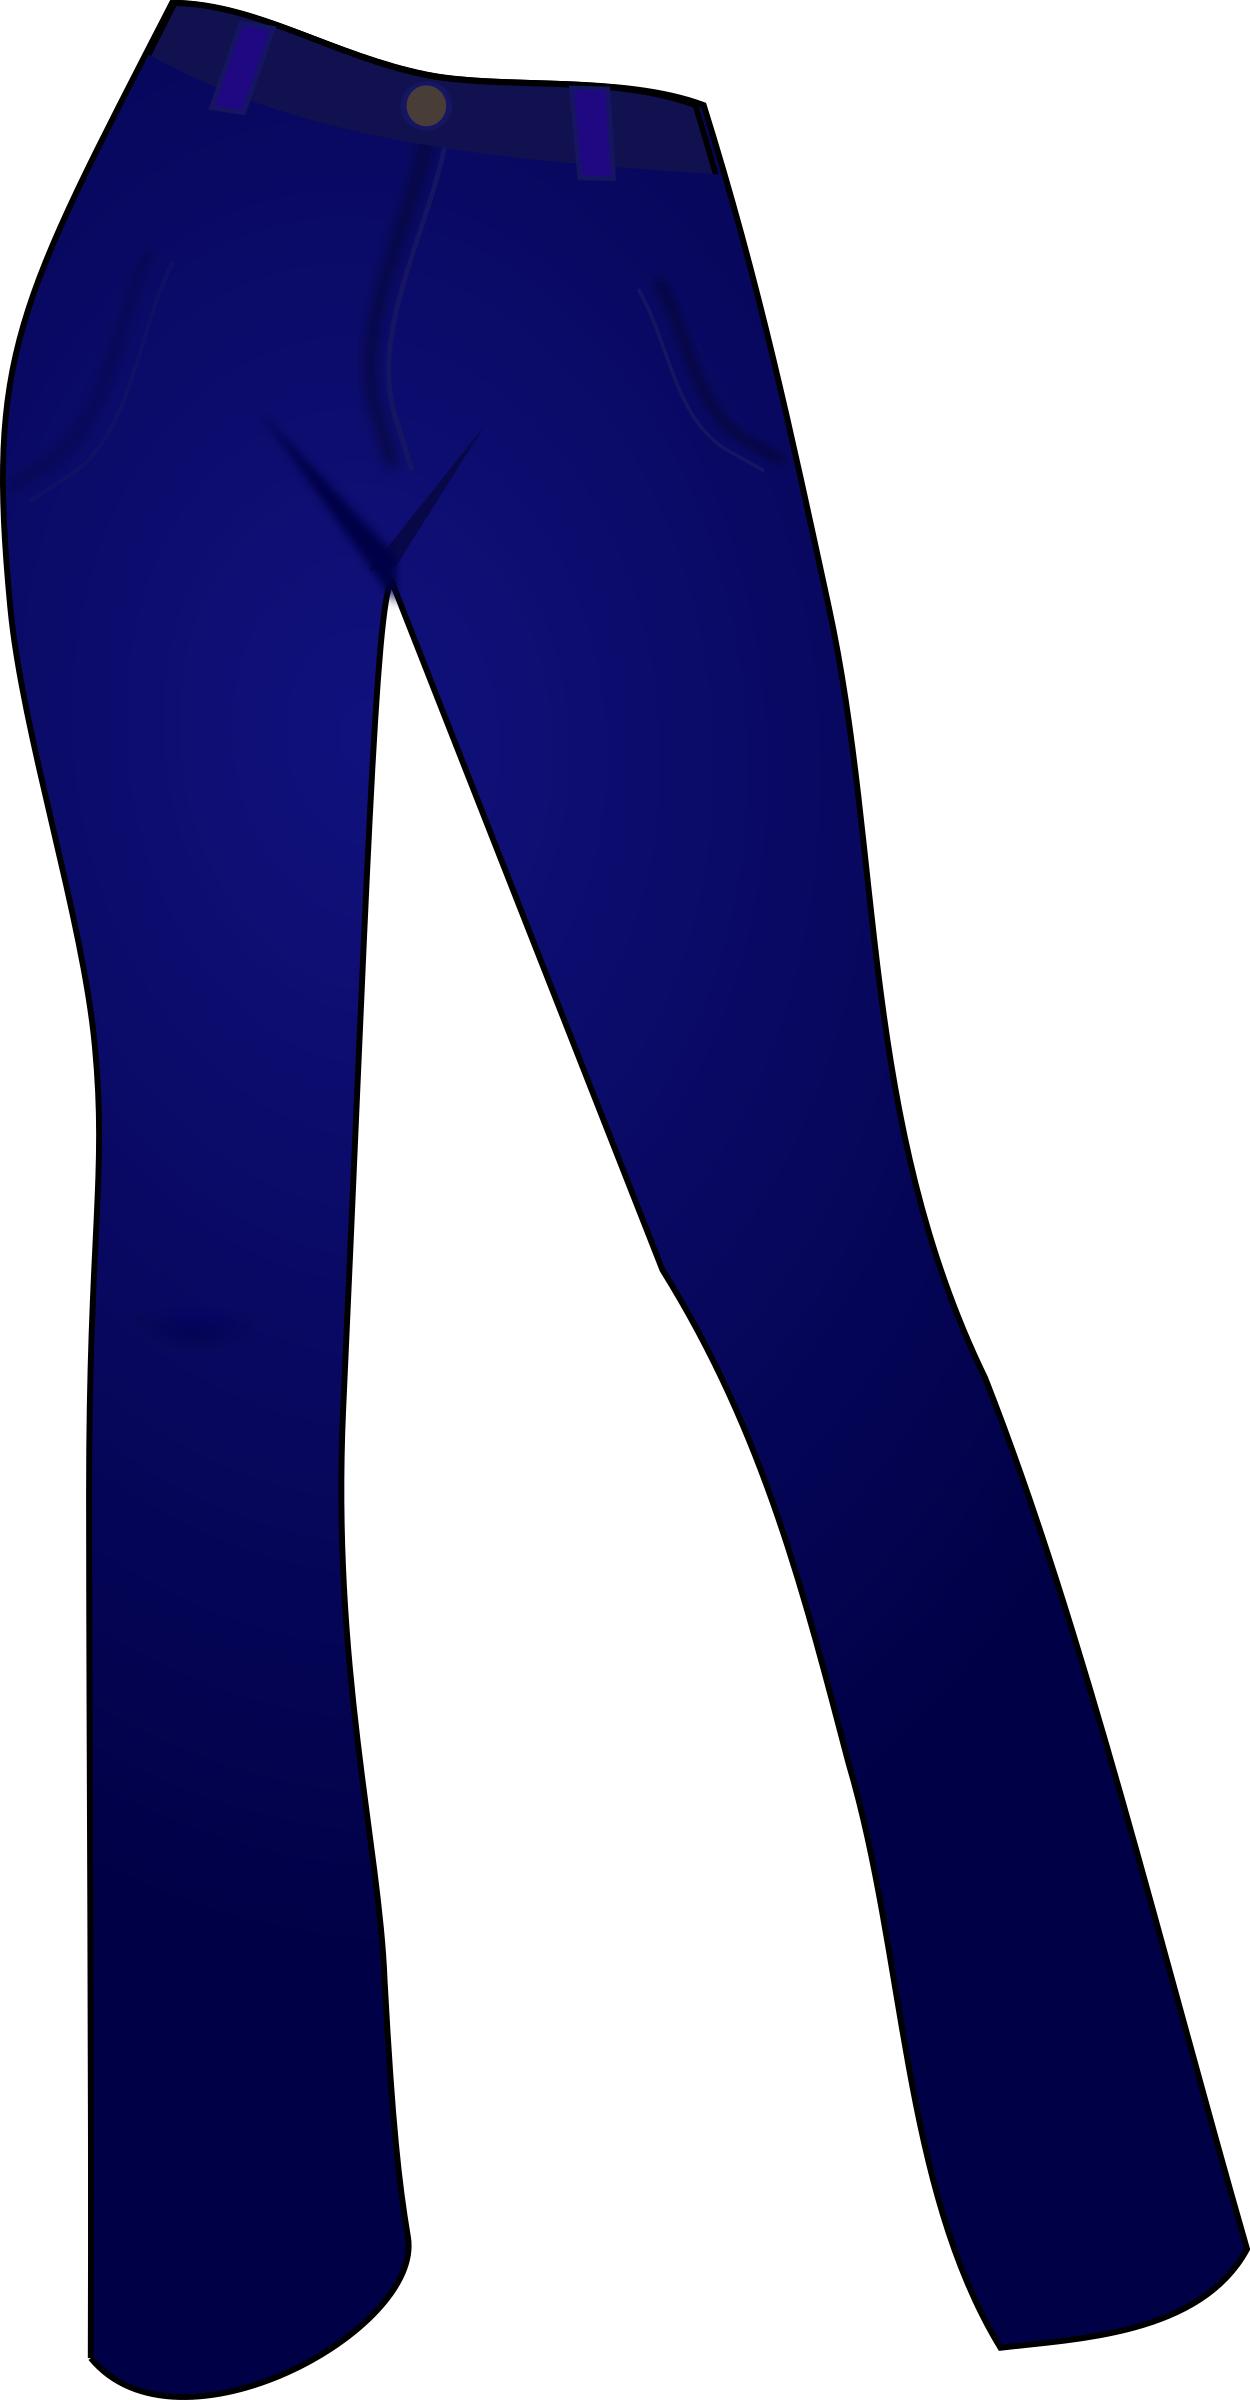 Jeans png